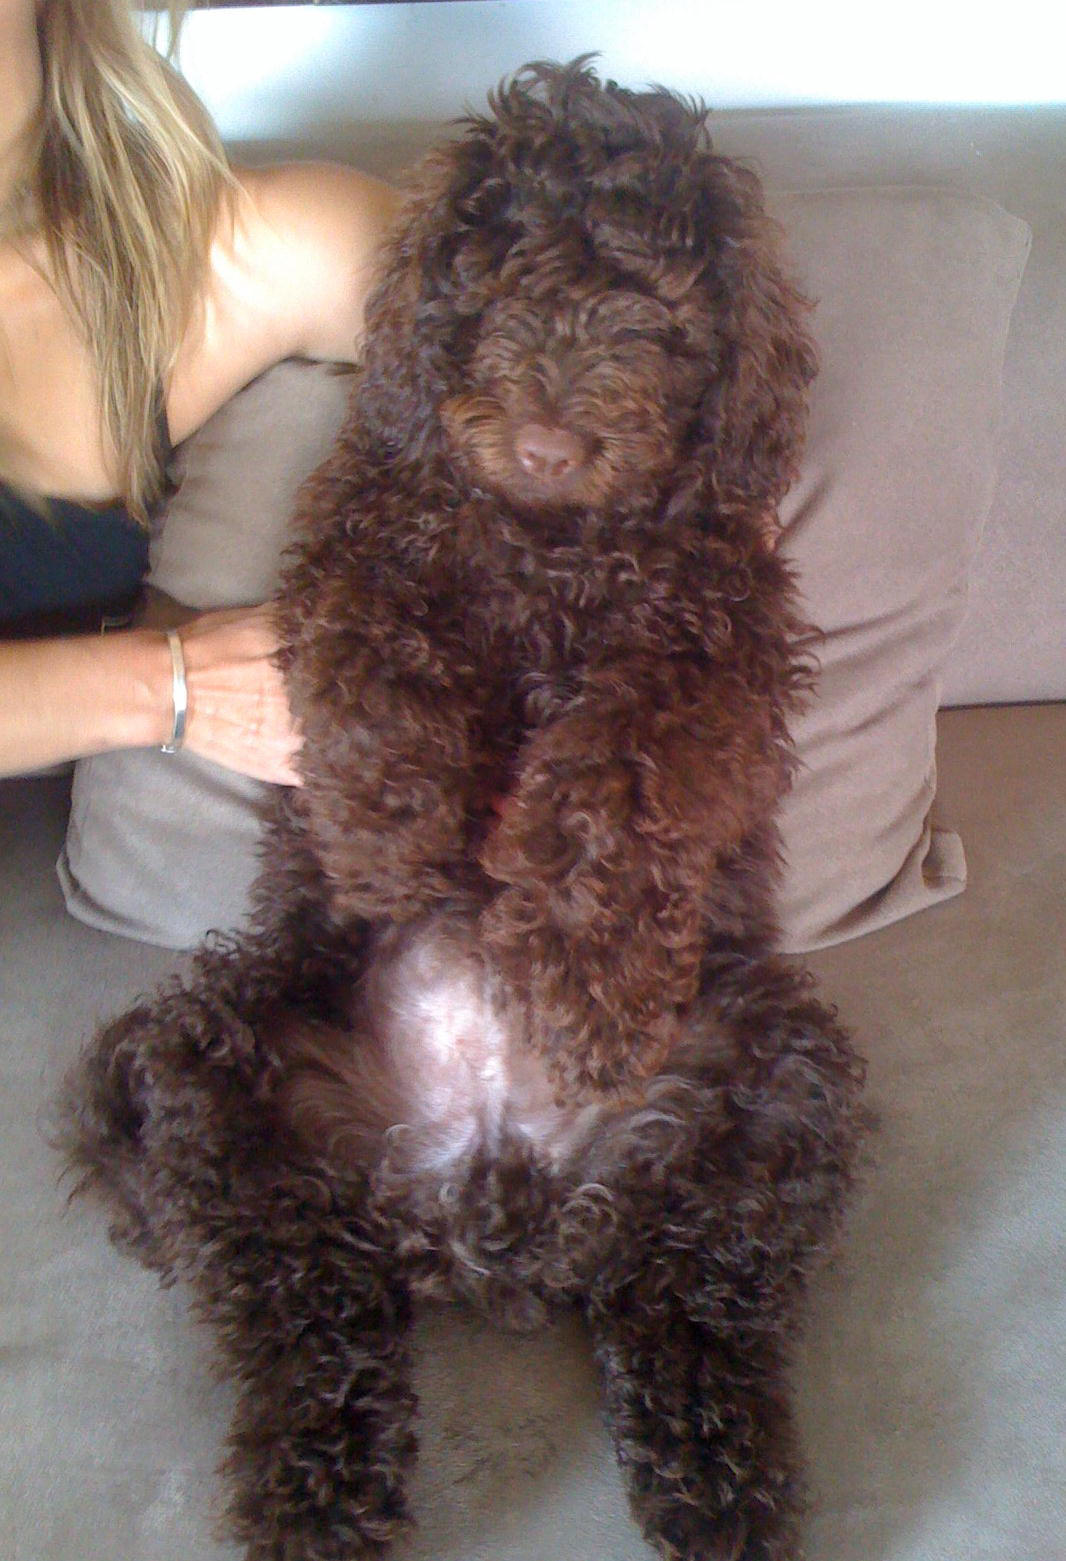 Australian Labradoodle puppy Chewy owned by Richard and Elisa in London